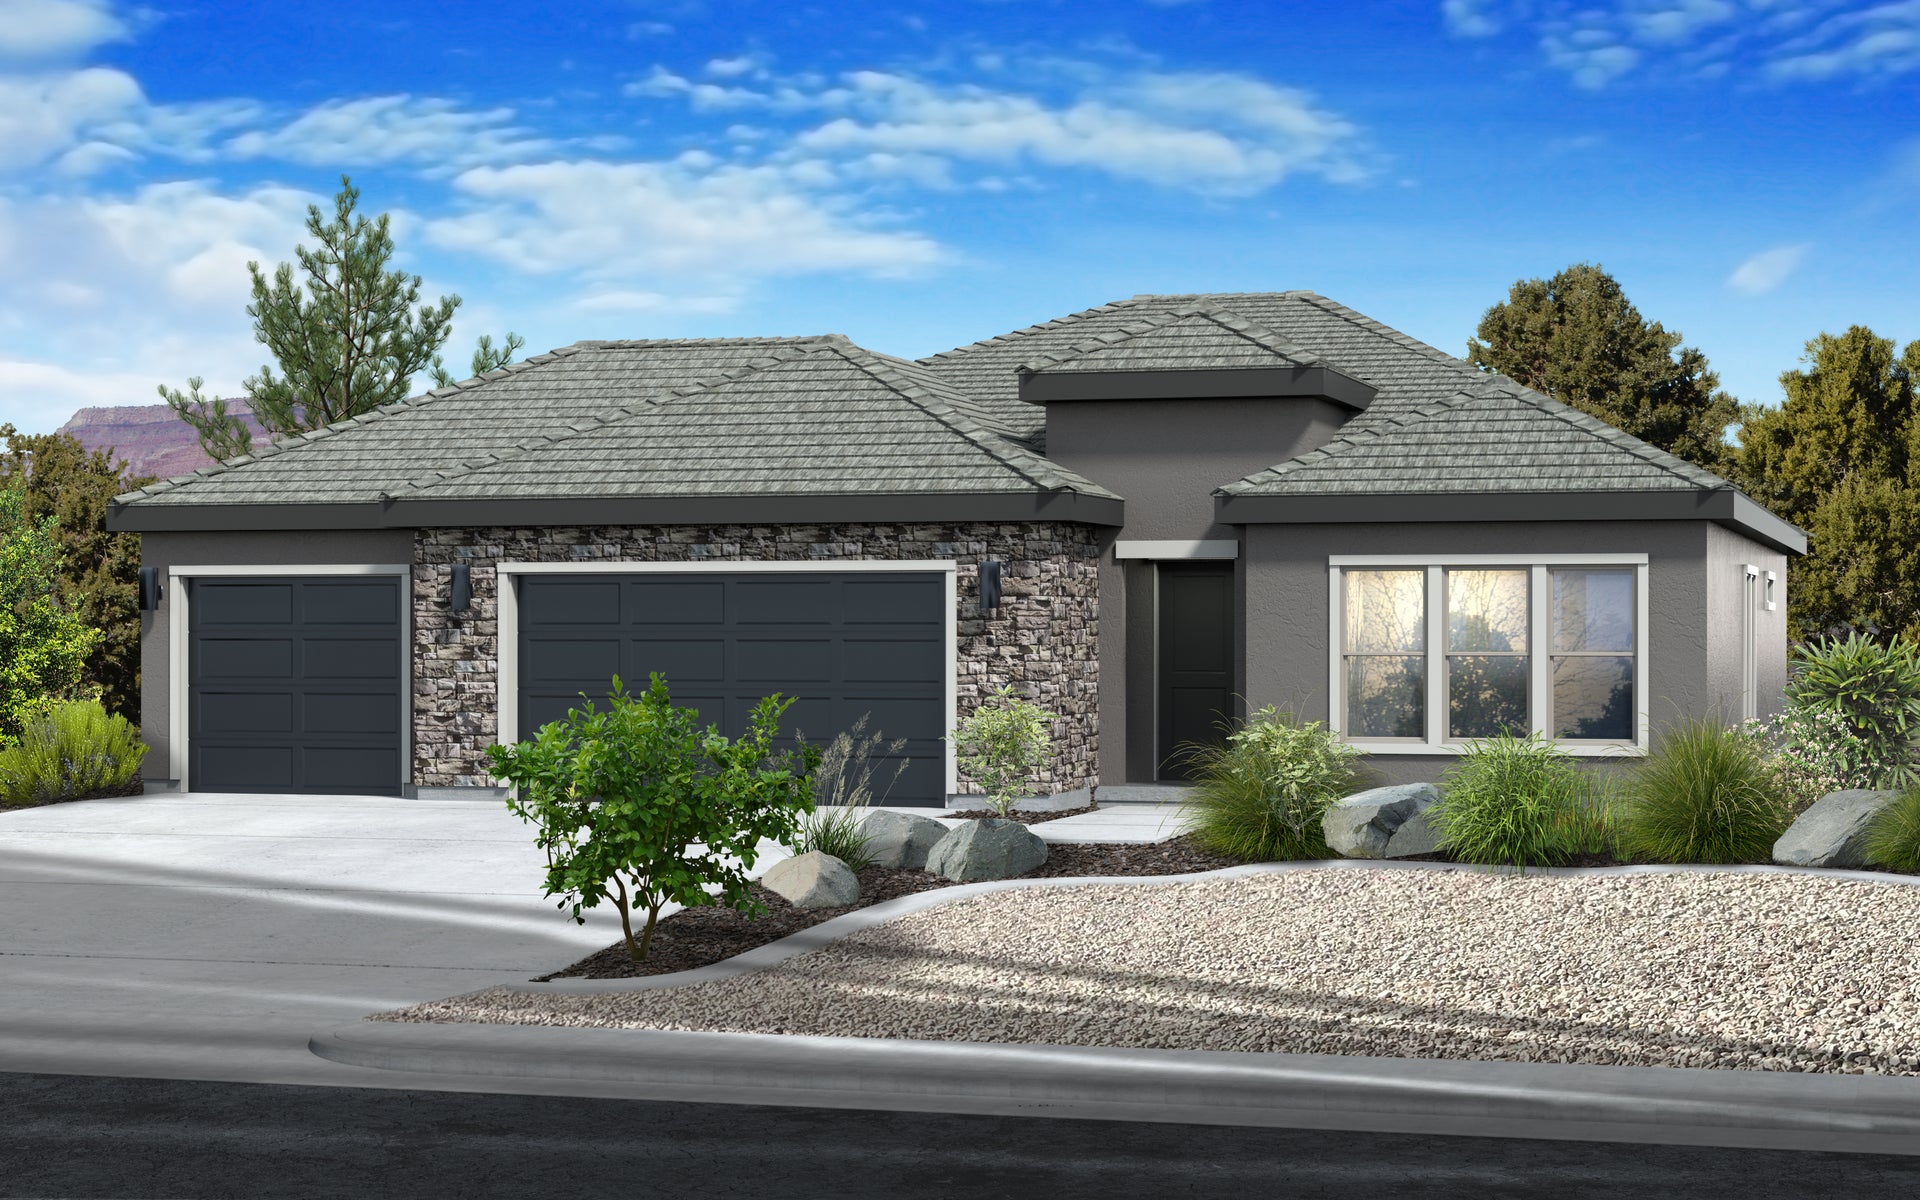 Bluemont Southwest Spanish new home in St. George, UT